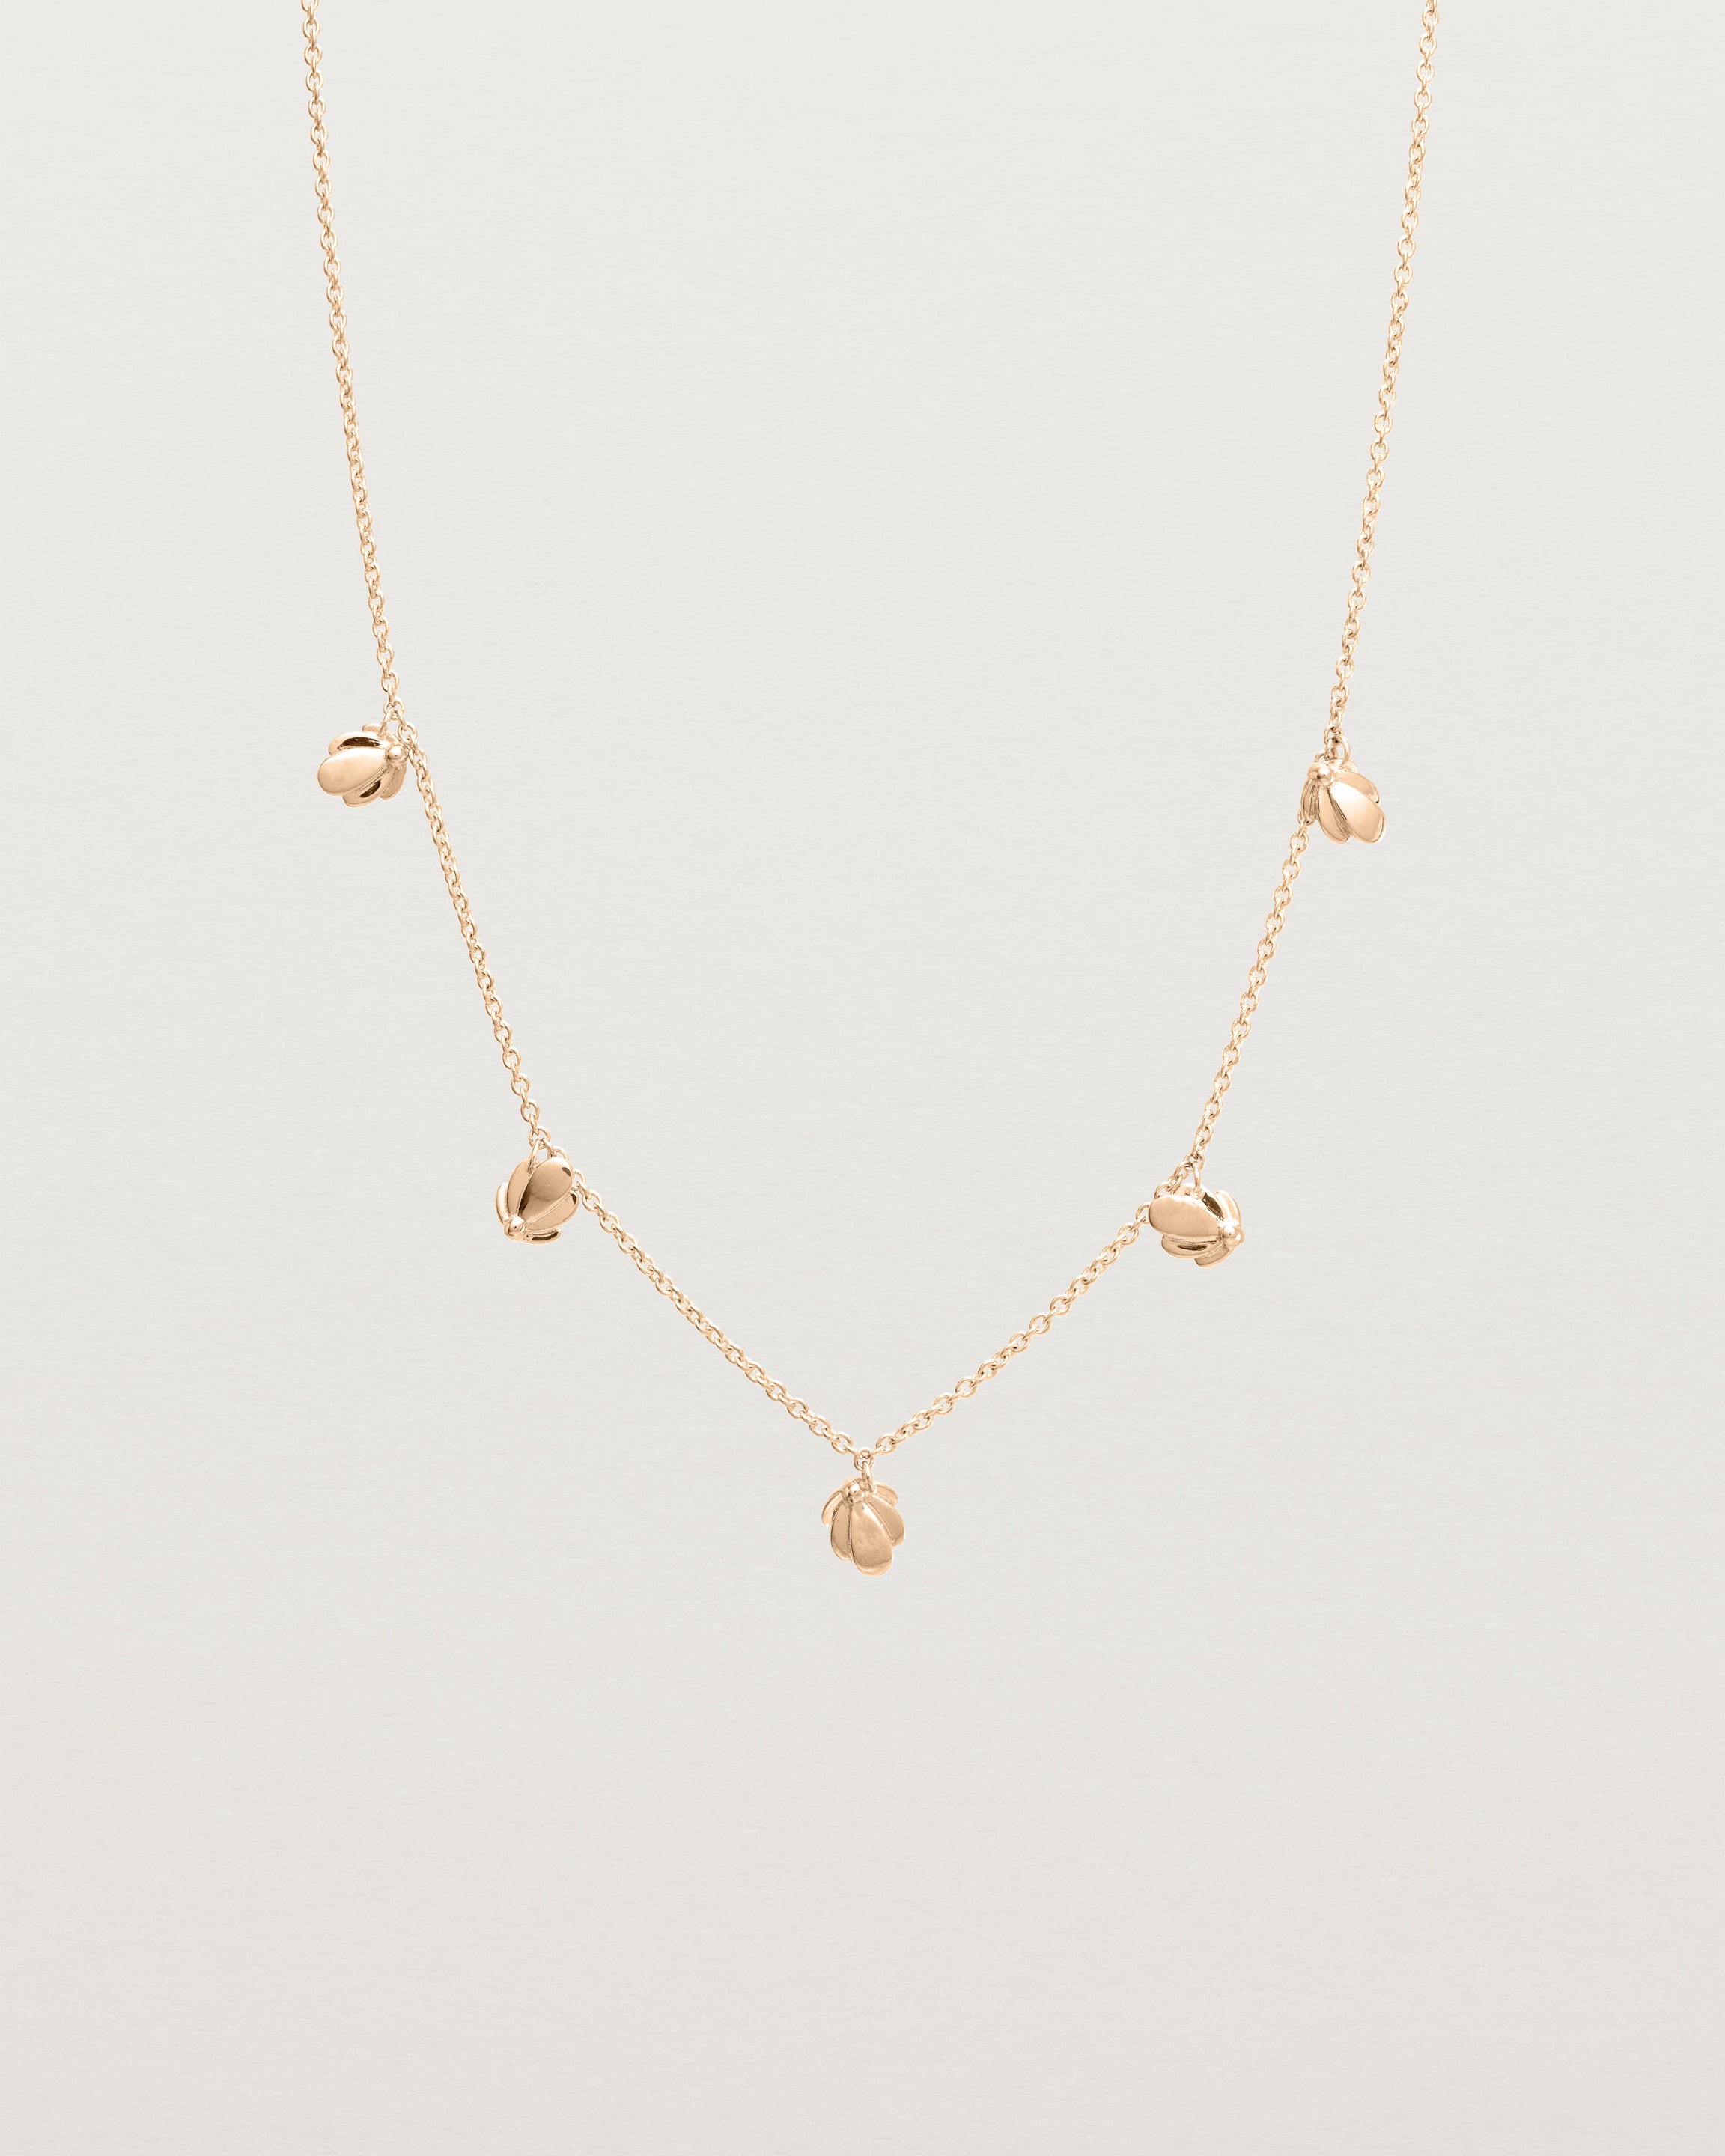 Front view of the Aeris Charm Necklace in Rose Gold.